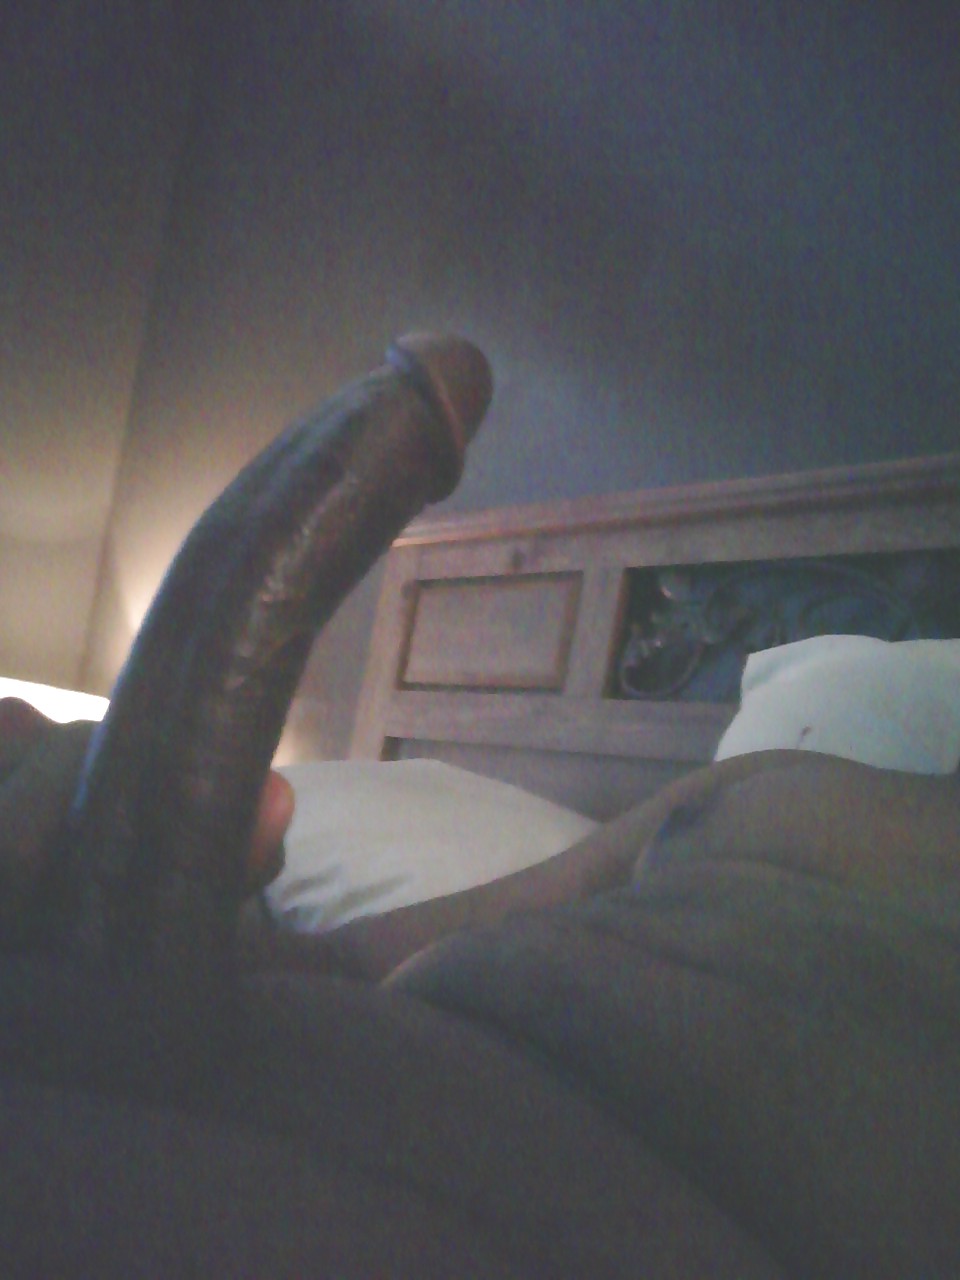 More of my long cock :-) #6496246